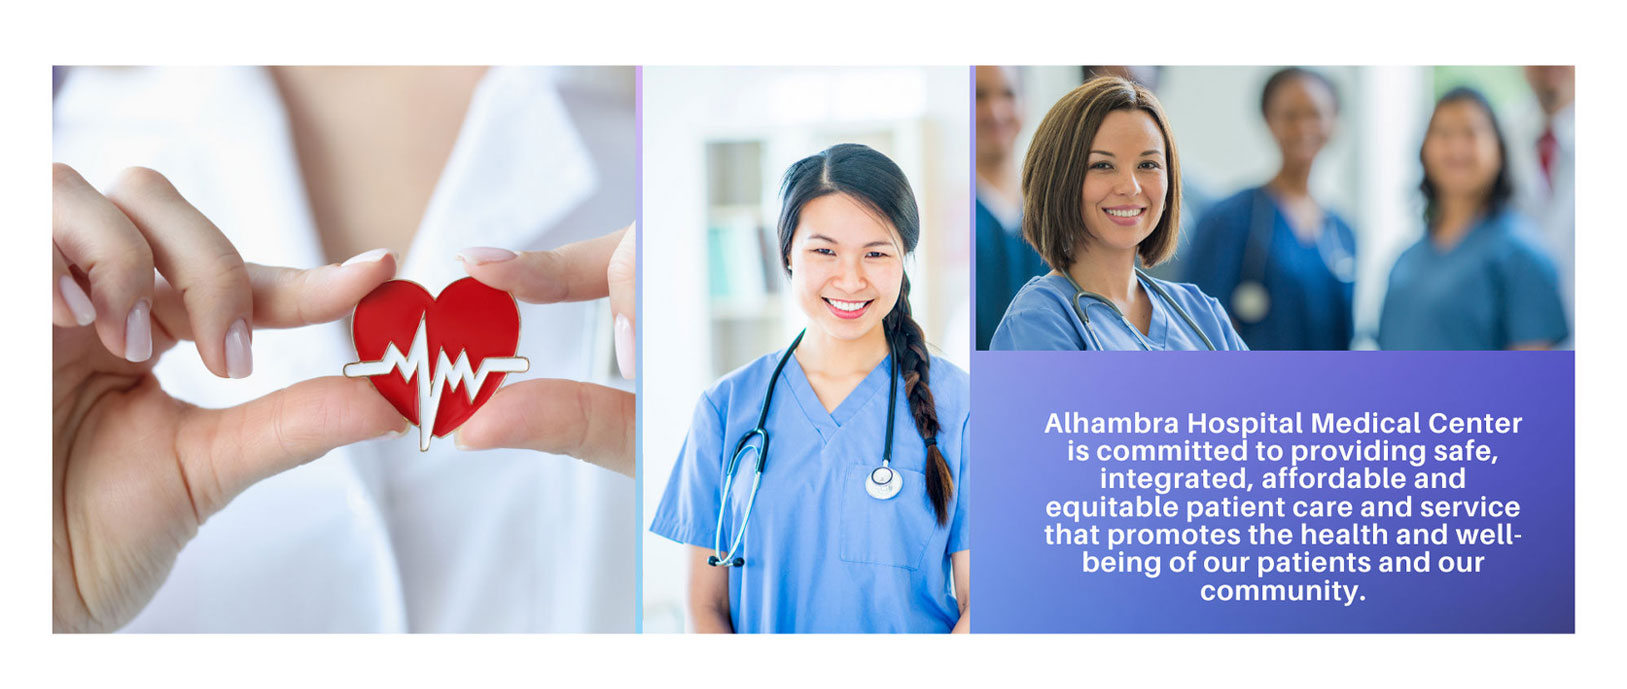 AHMC is committed to providing safe, integrated, affordable patient care and service.